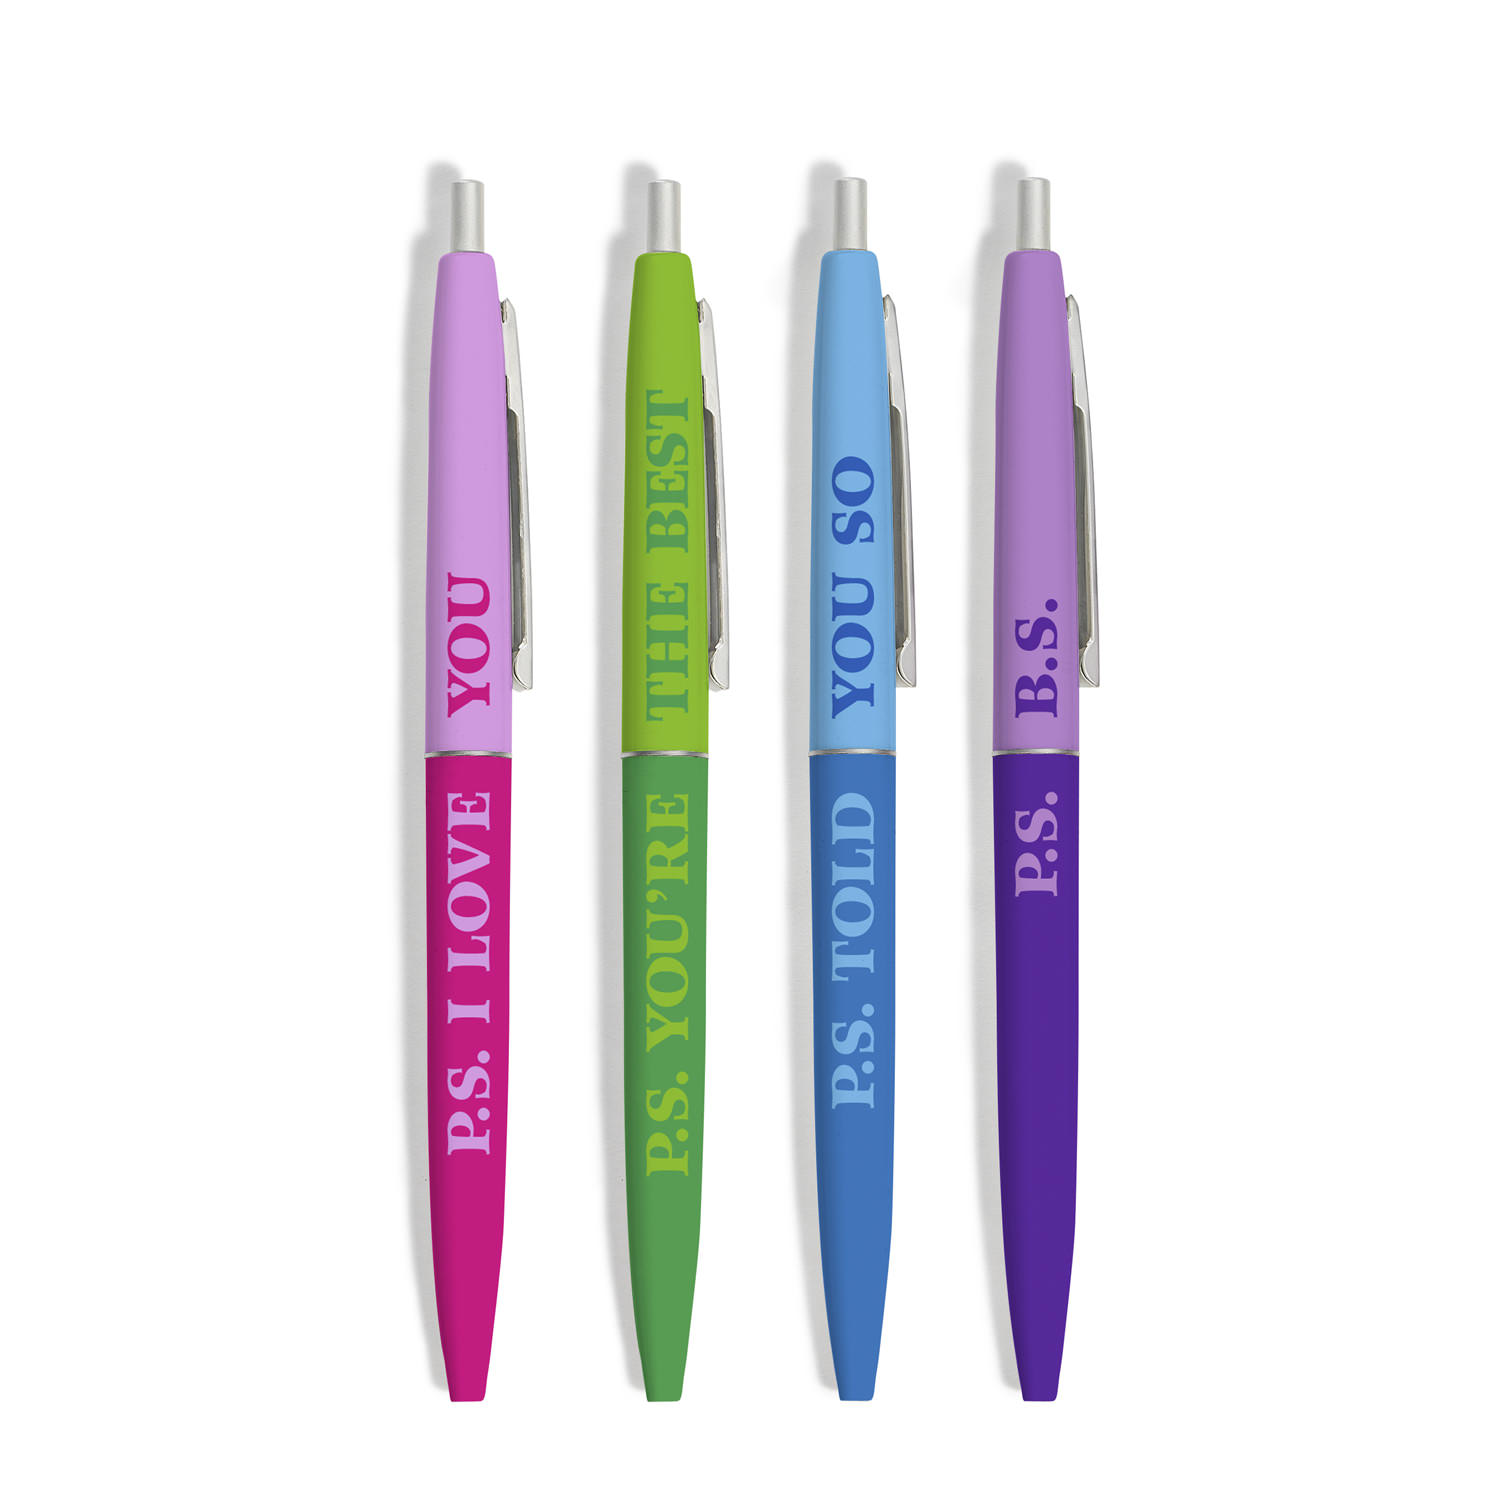 Knock Knock Pen Set P.S.I Love You/You're The Best/Told You/B.S (Set of 4)